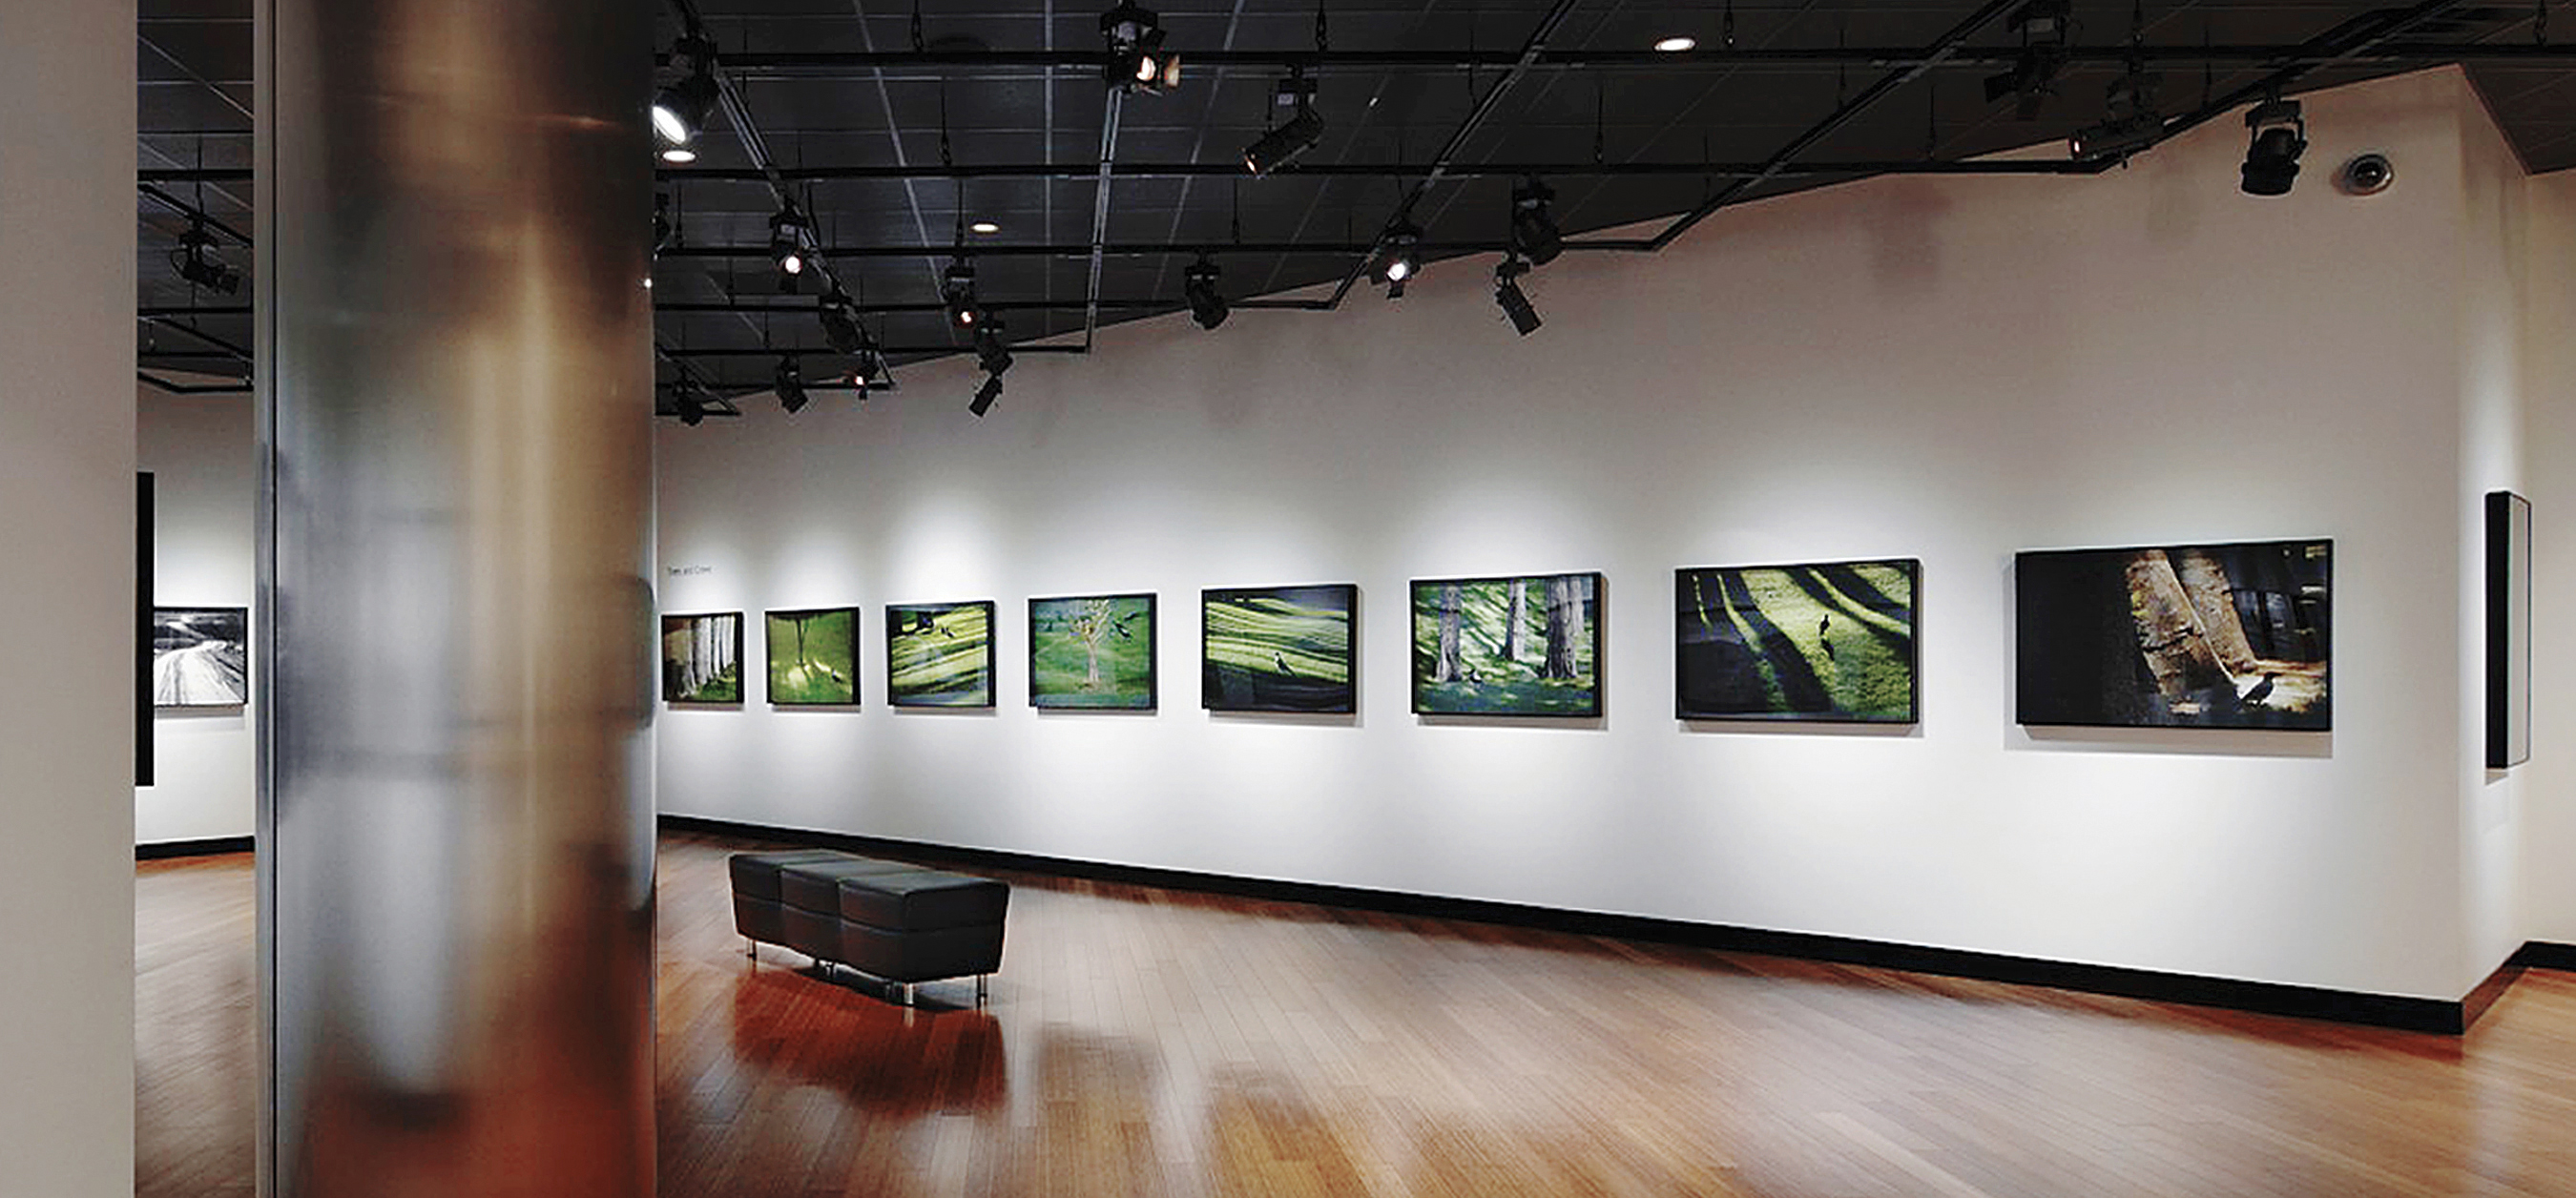 Southeast Museum of Photography gallery